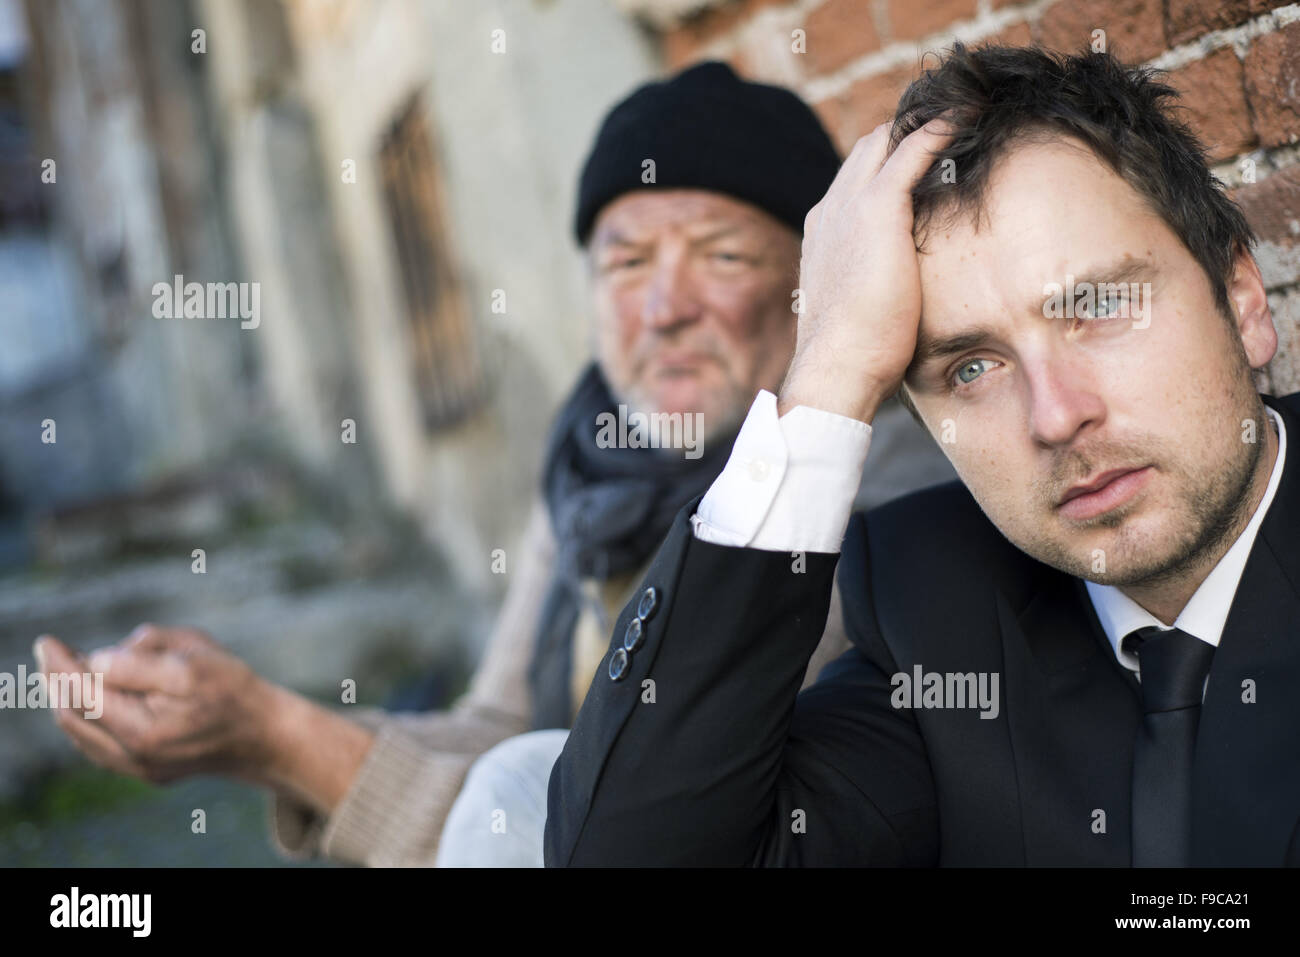 Jobless manager is on the street. Stock Photo